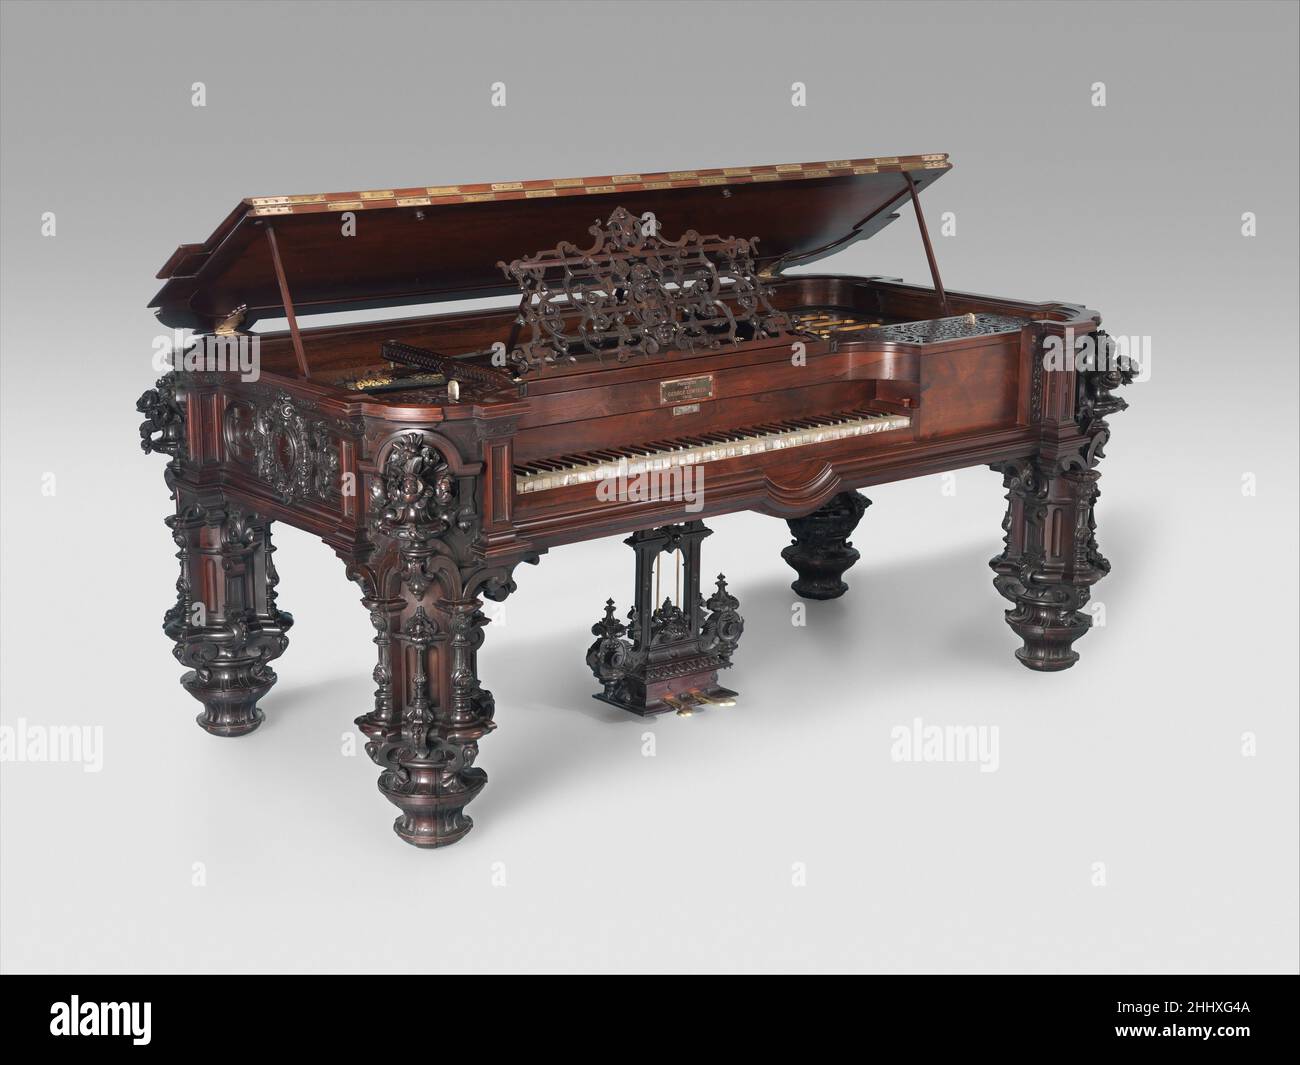 Square Piano 1853 Robert Nunns This costly showpiece of Renaissance and  Rococo Revival eclecticism, an obvious status symbol perhaps intended for  display at New York's Crystal Palace exposition, elevated the reputation of